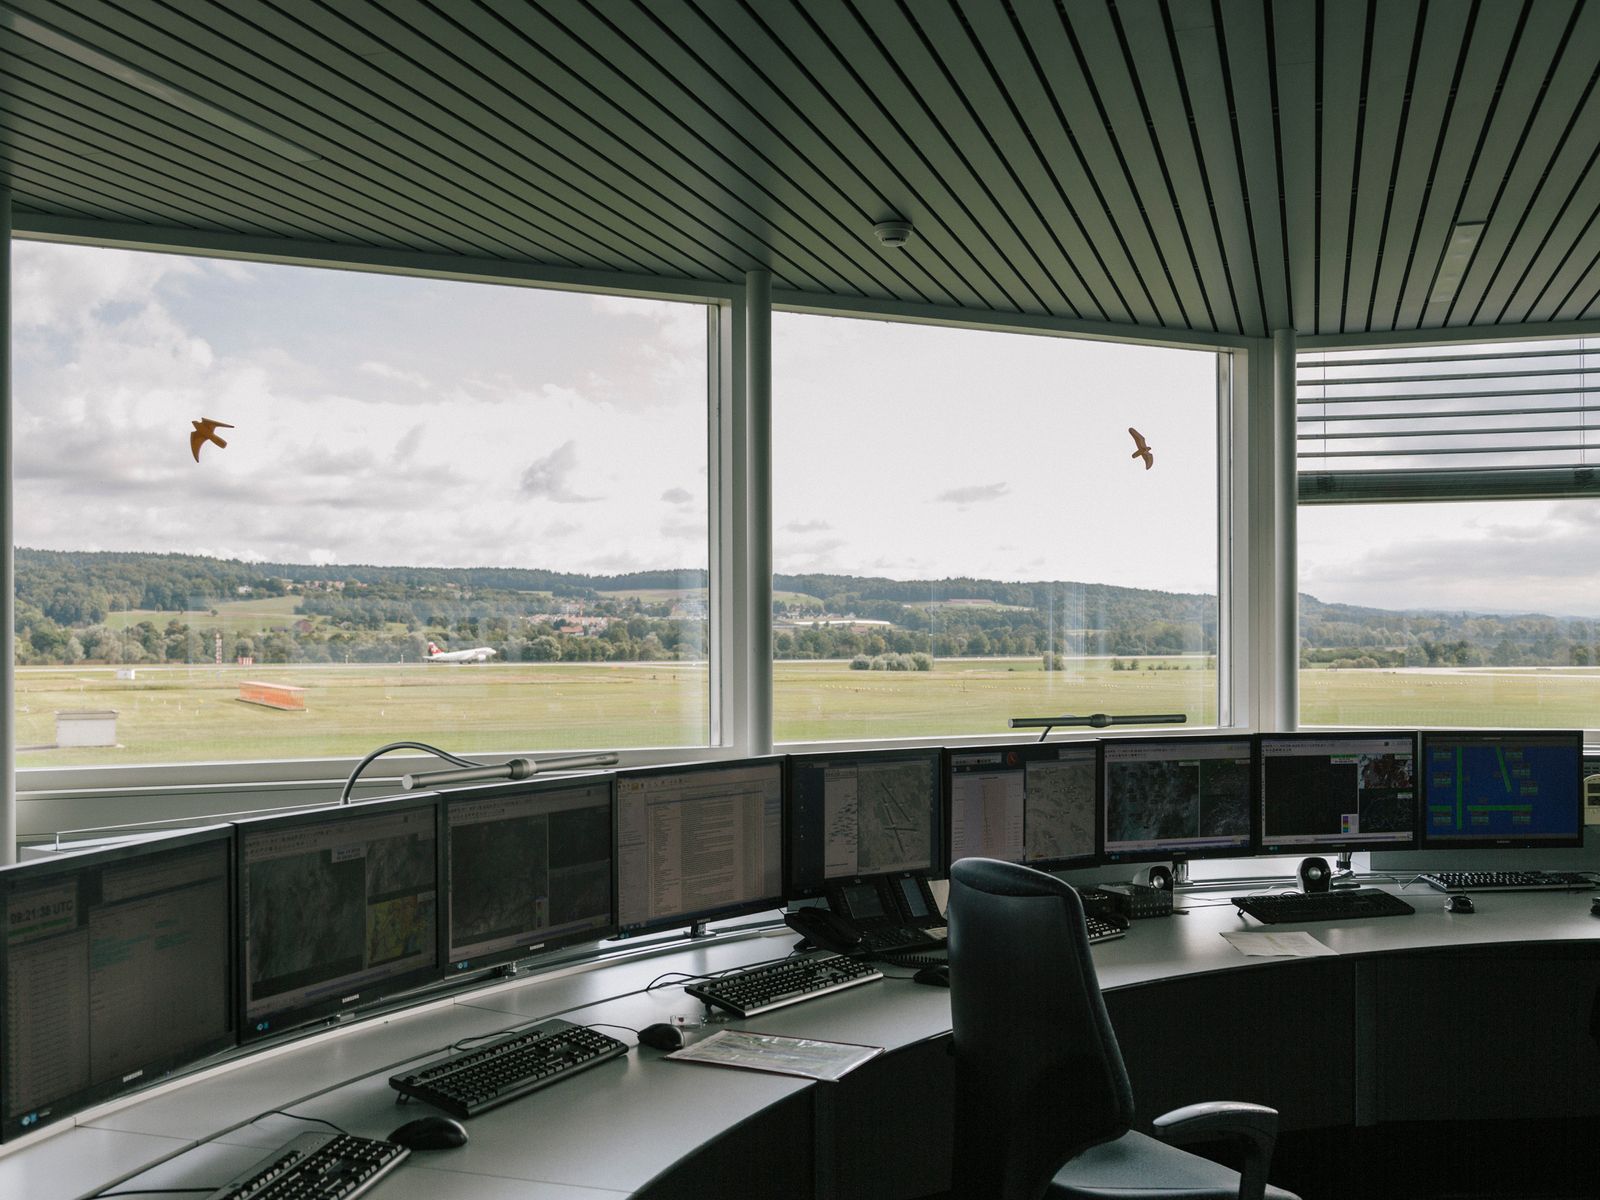 © Salvatore Vitale - Control room at the Zürich airport for the visibility check operated by MeteoSwiss.